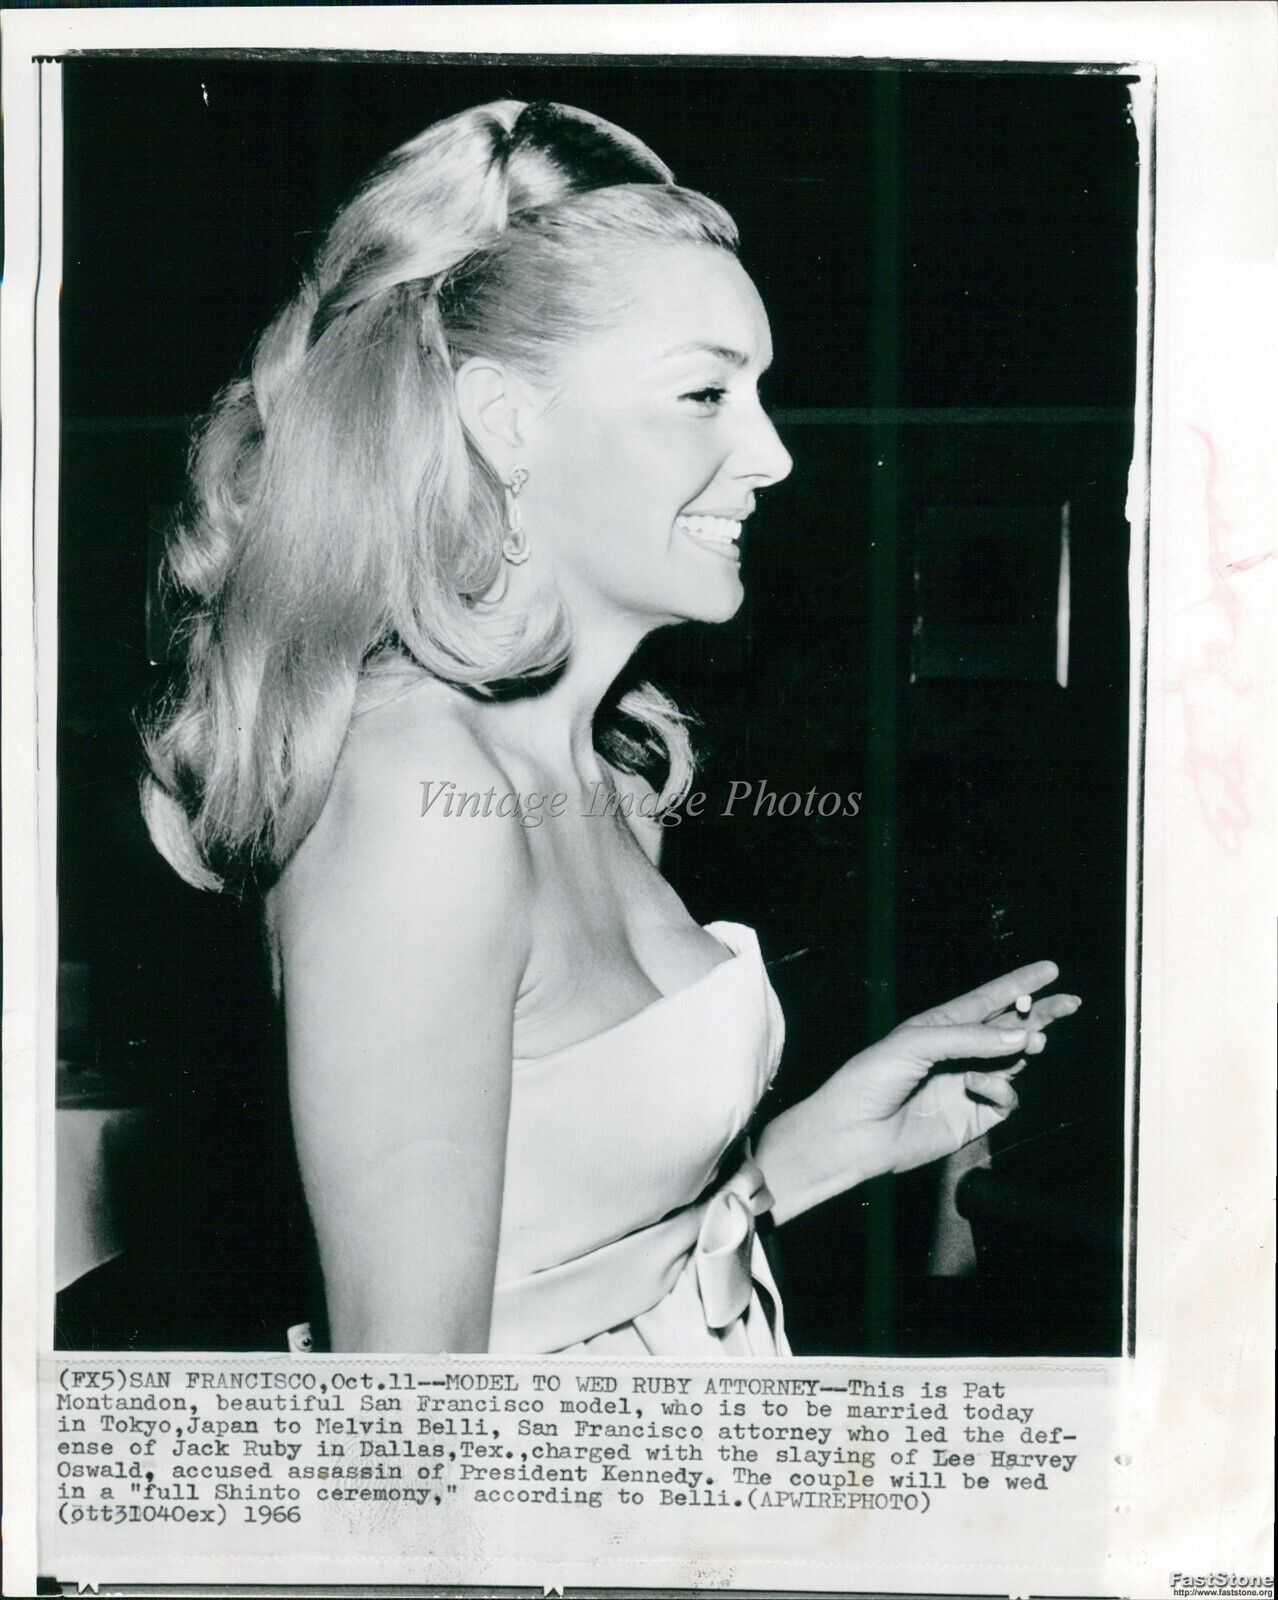 1966 Pat Montandon Model To Wed Atty Melvin Belli, Tokyo Society Wirephoto 8X10